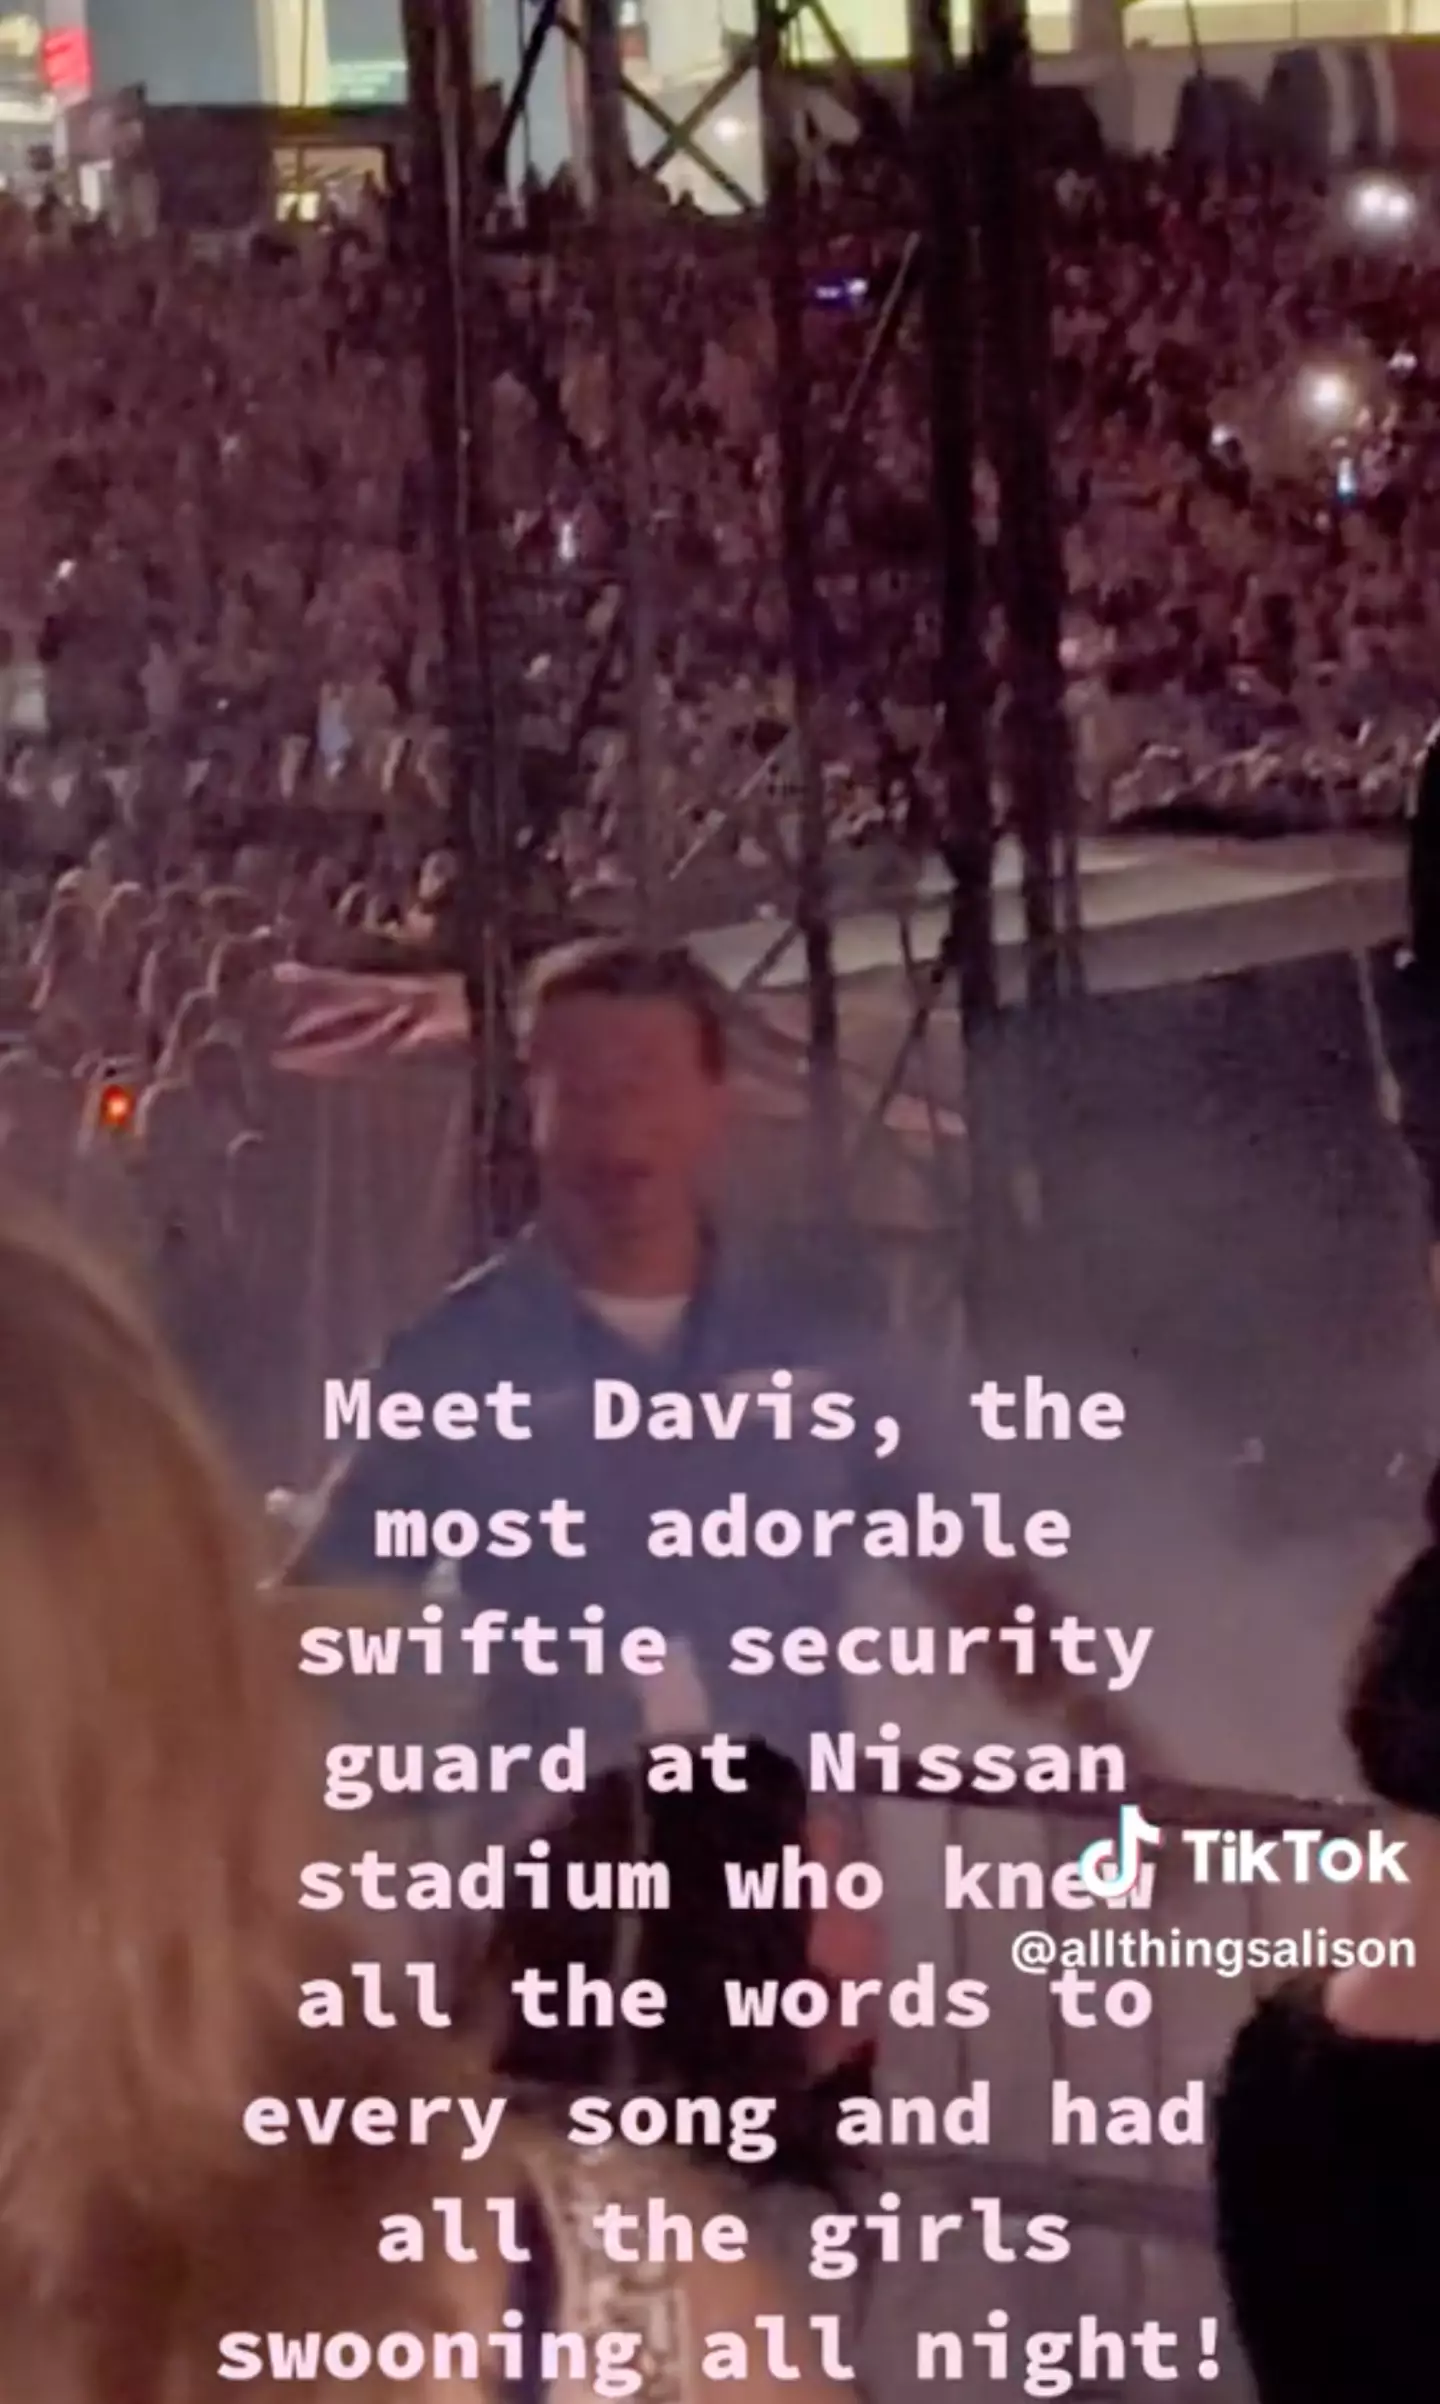 Davis admits he only took the job so he could see Taylor Swift live.